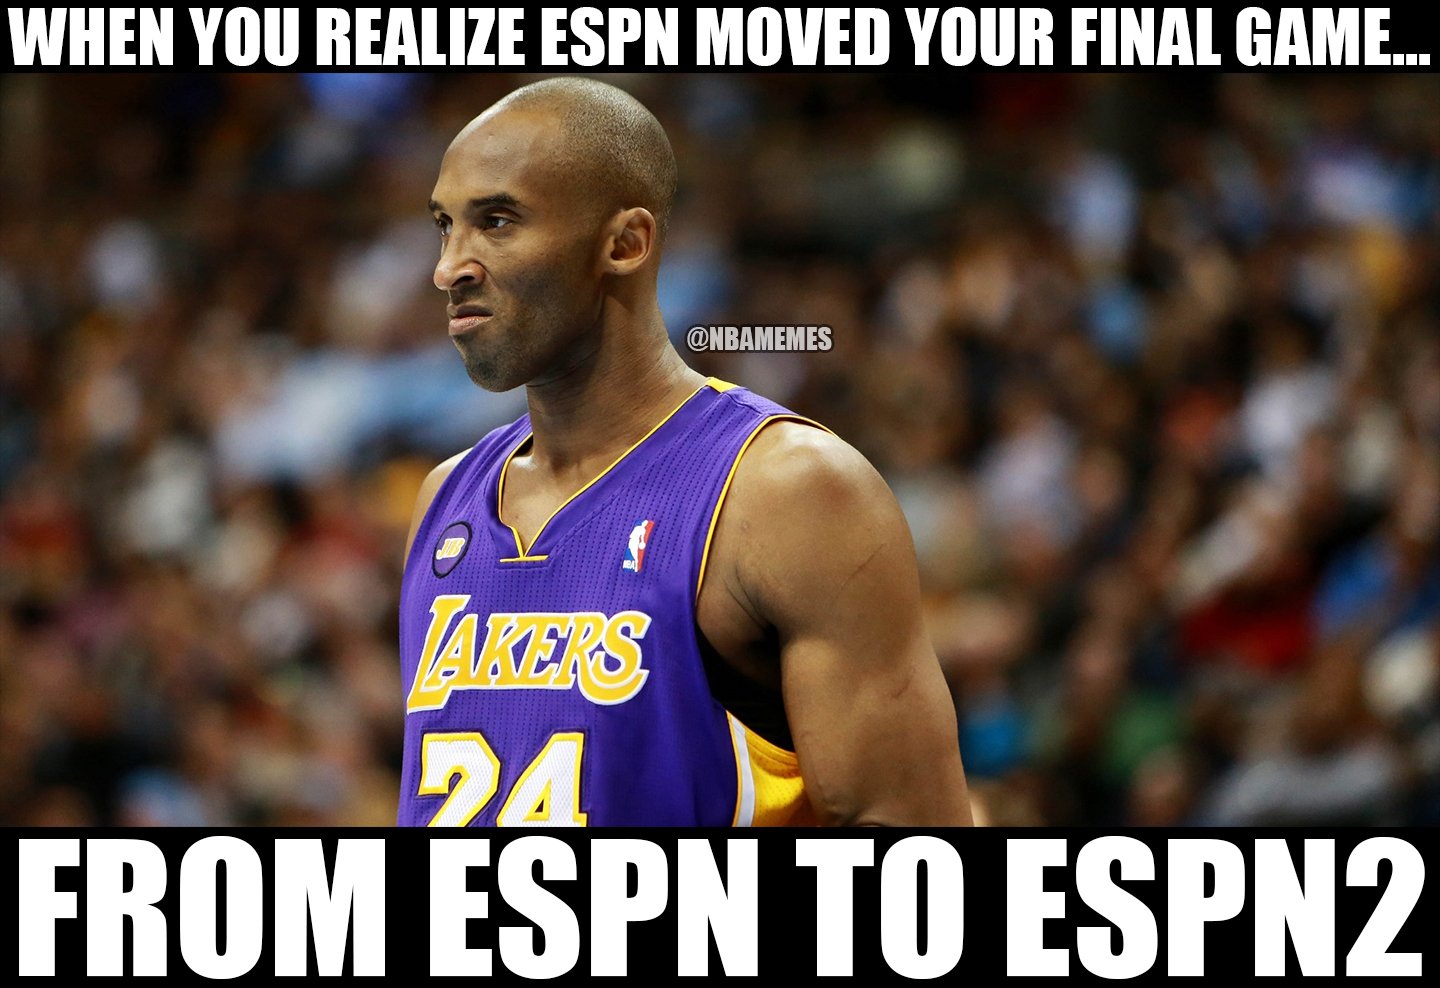 NBA Memes on Twitter: "Kobe Bryant's game gets booted from ESPN for the